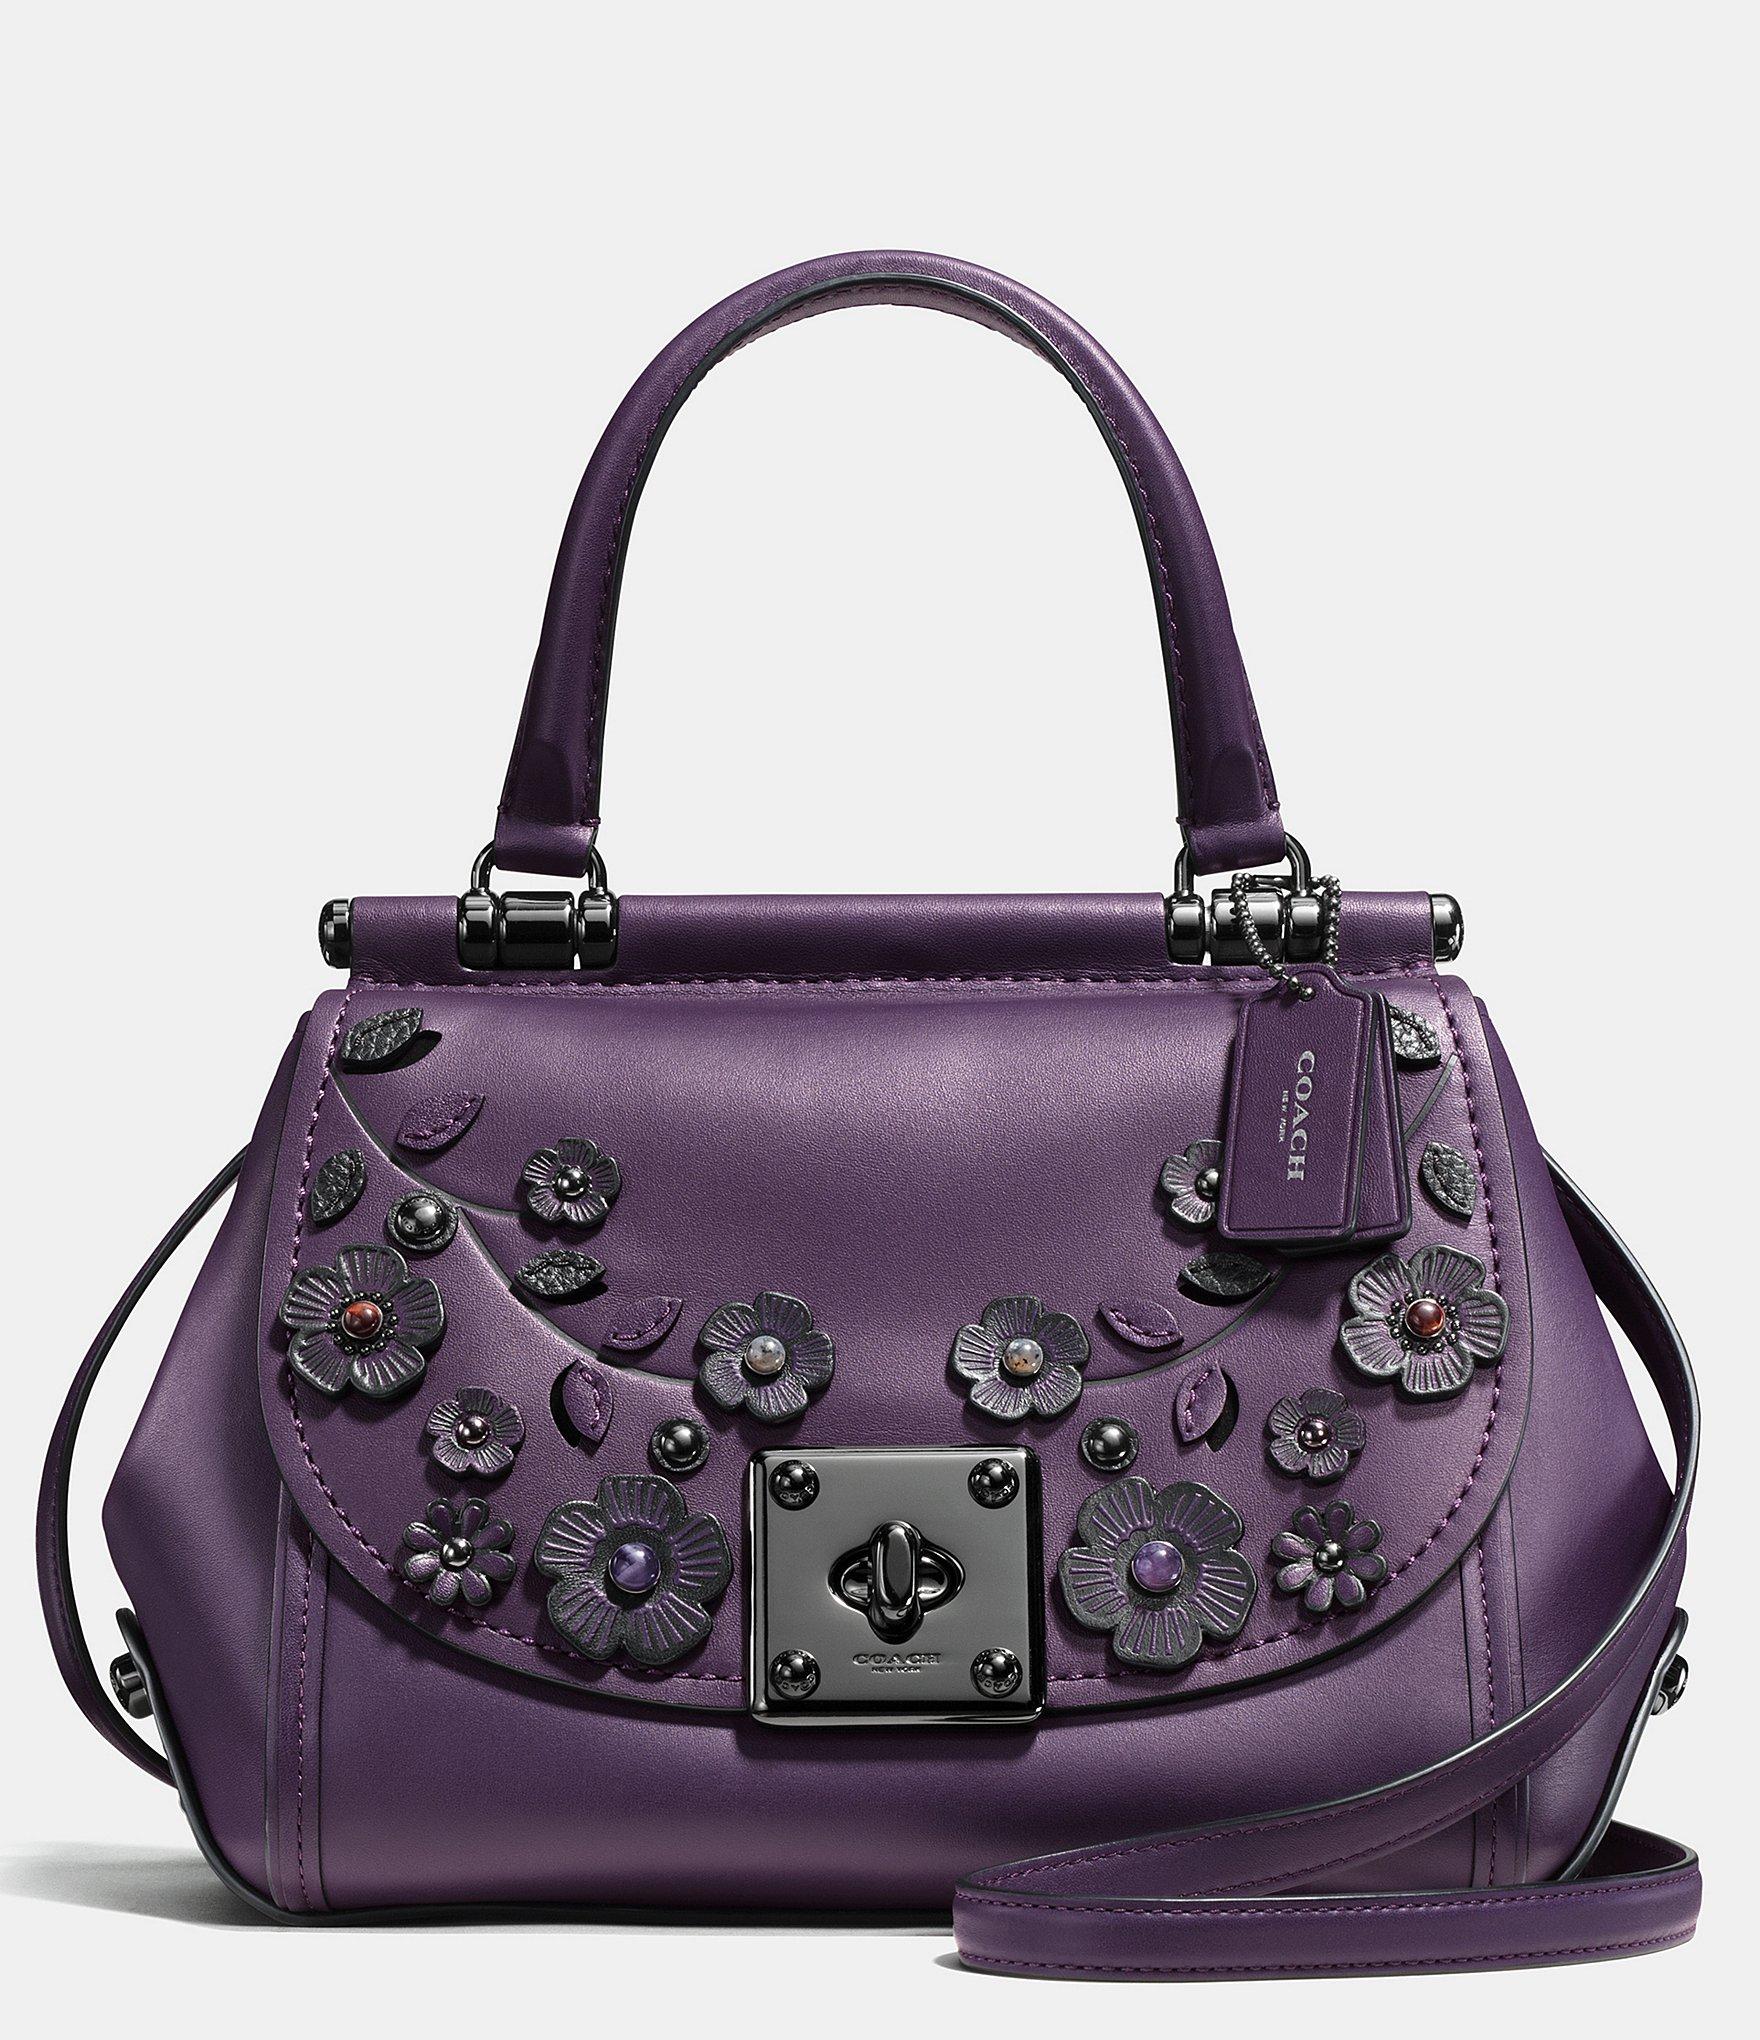 Coach Drifter Top Handle Satchel In Willow Floral Print Leather in Purple | Lyst